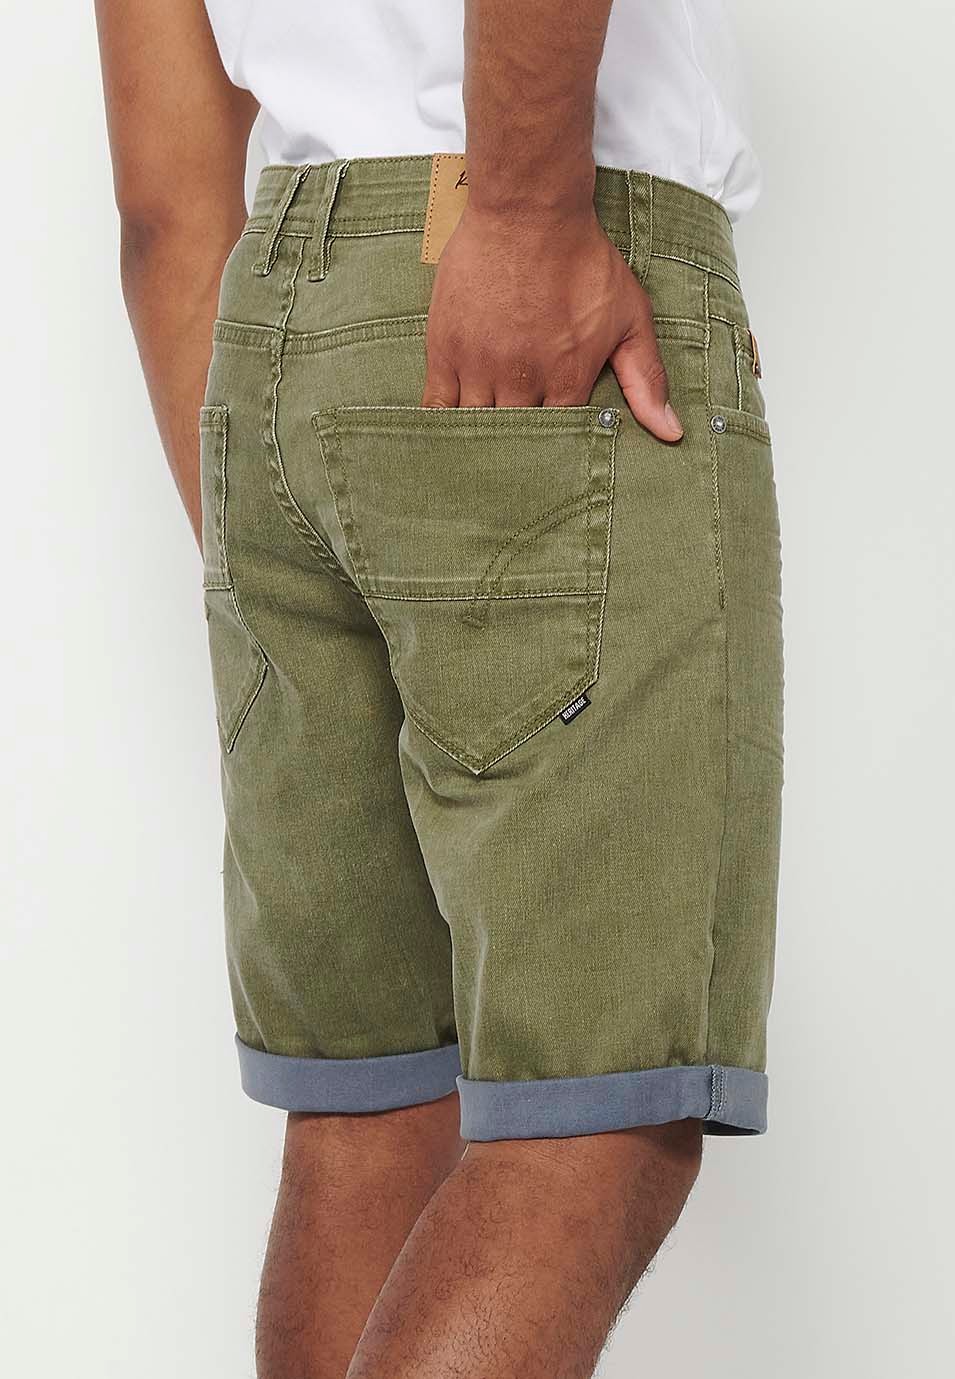 Denim Bermuda shorts with turn-up finish, front closure with zipper and button with five pockets, one pocket pocket, Olive Color for Men 1